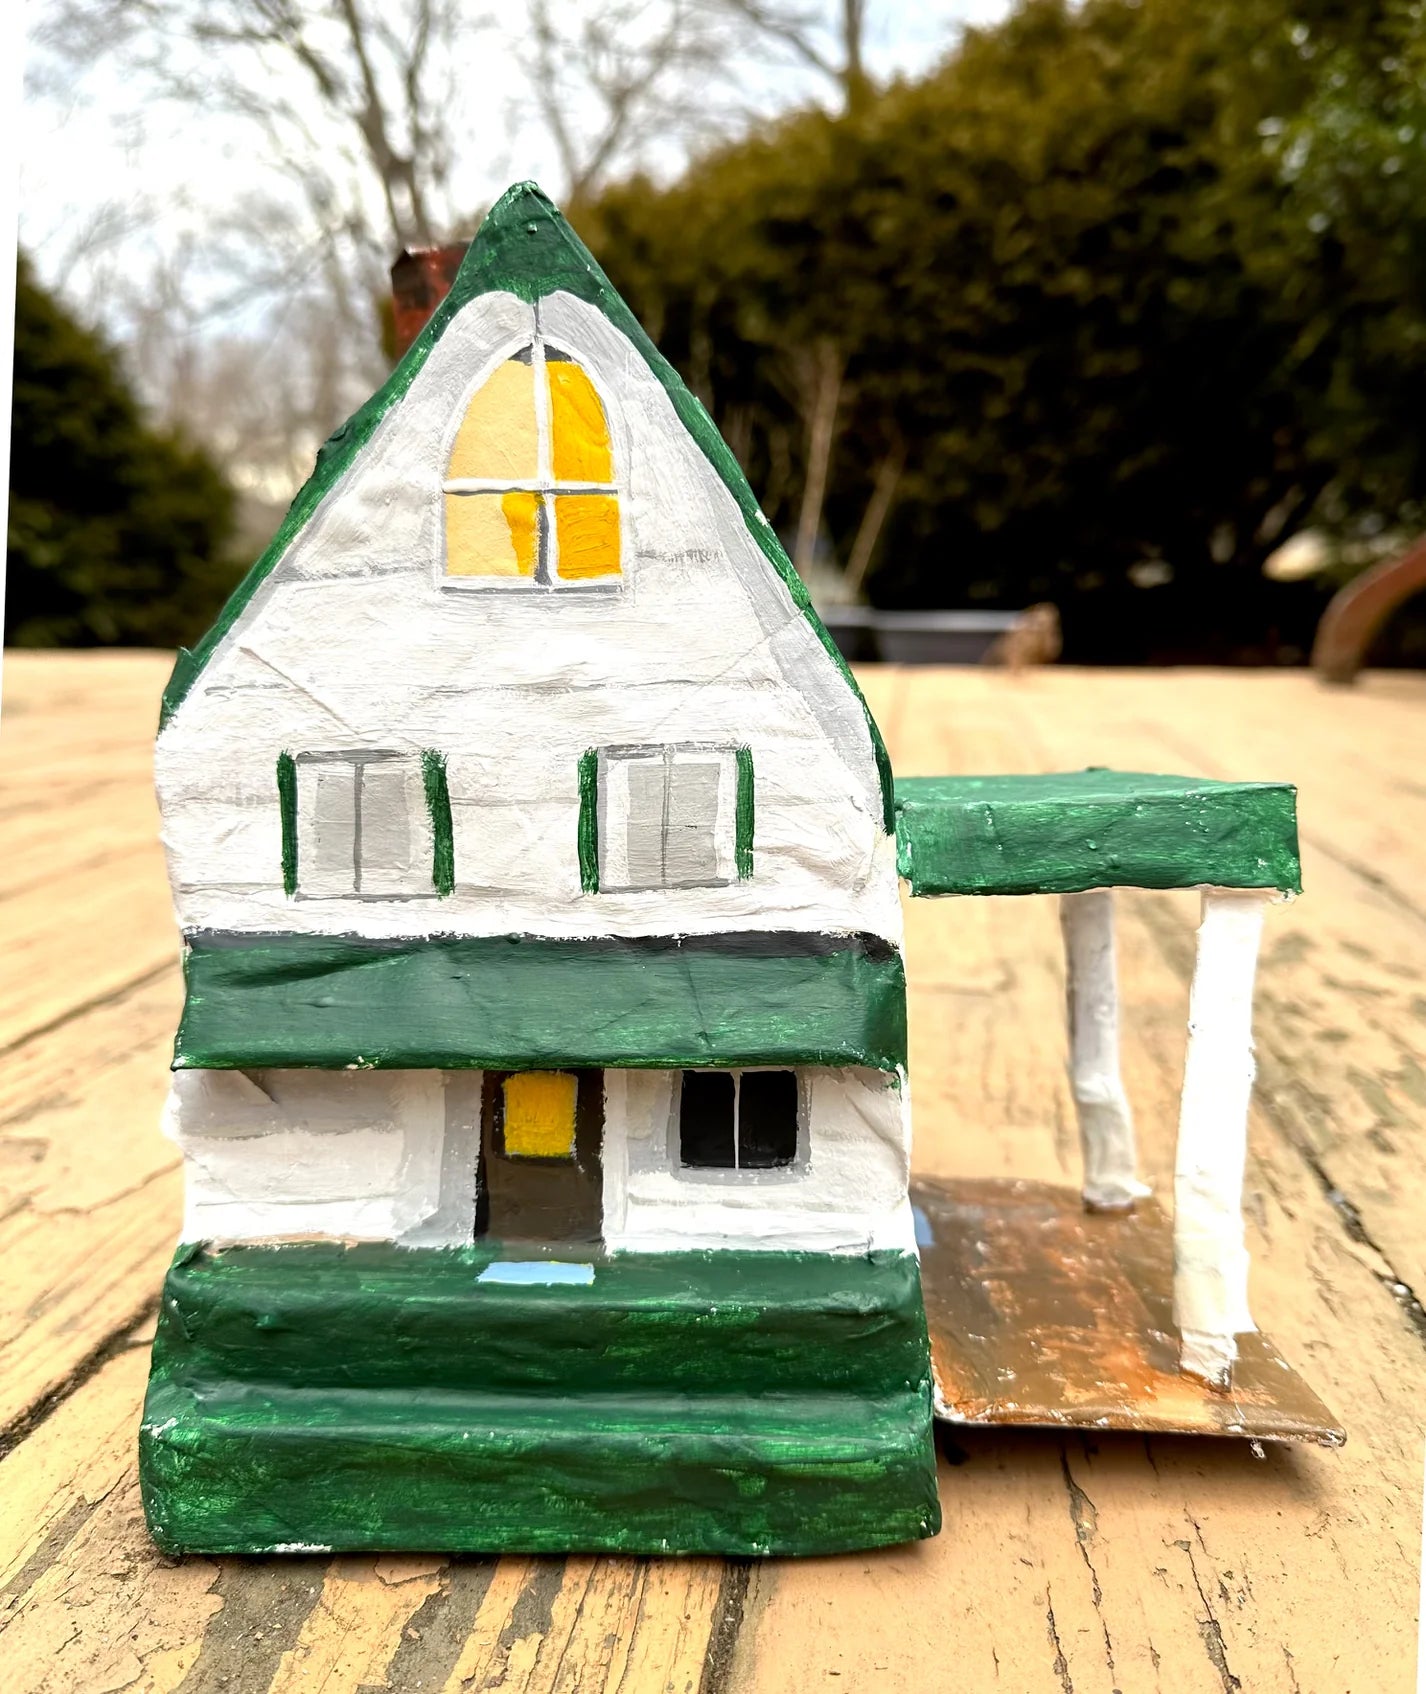 Paper Mache House Workshop with Polly Shindler, March 25 & 26, 2023